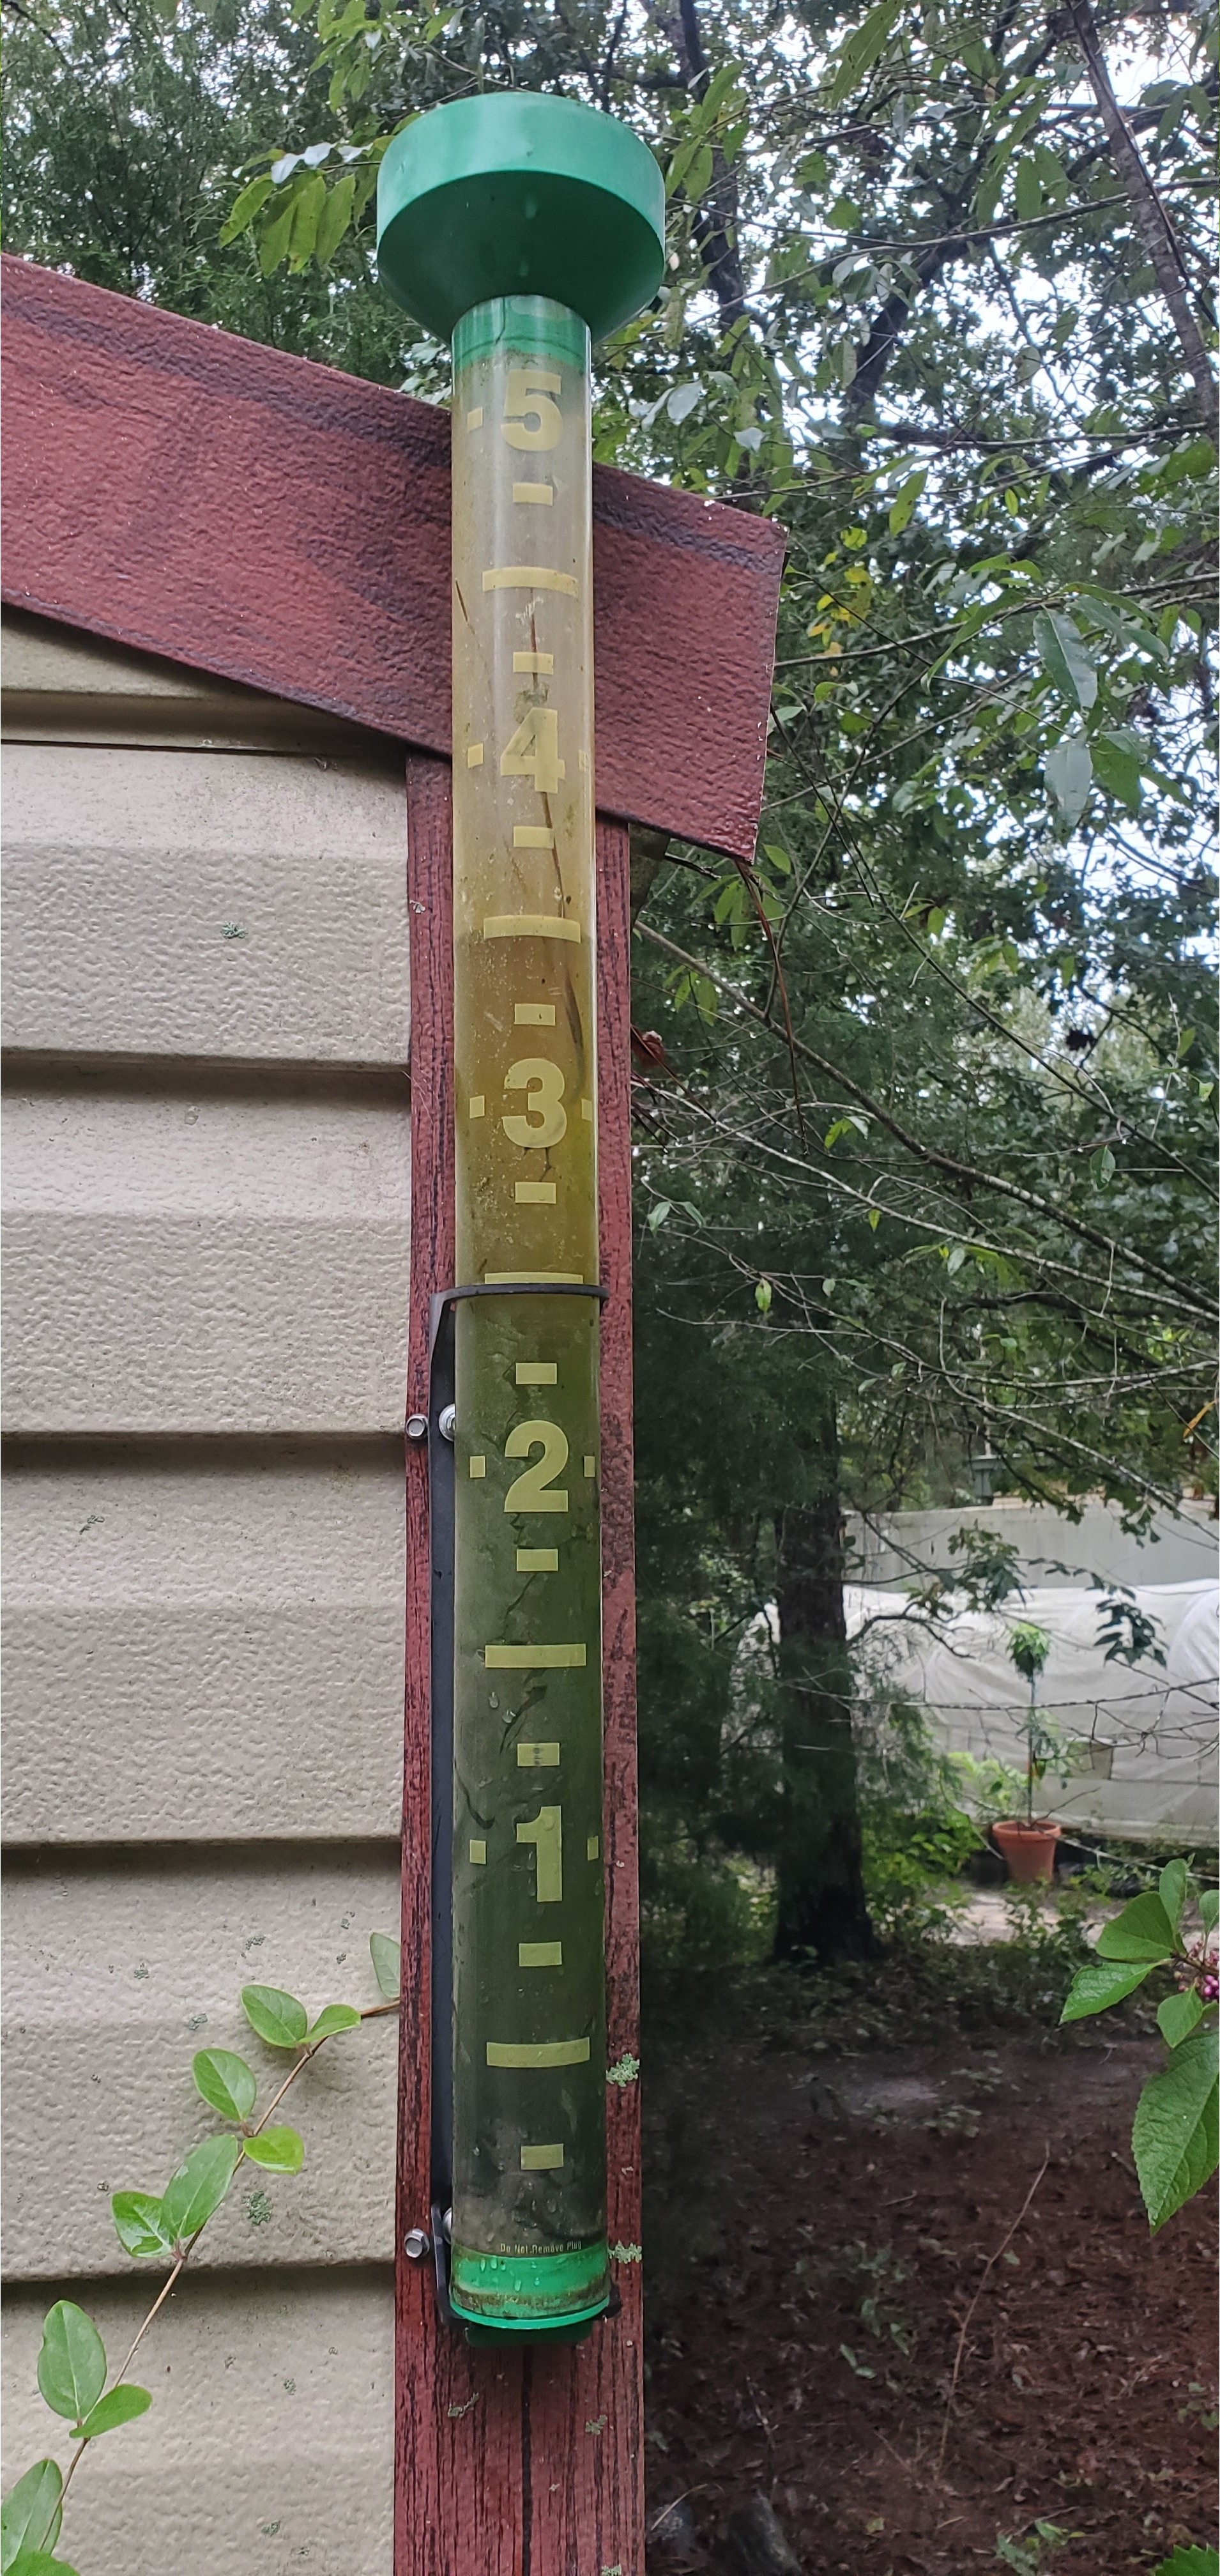 Shed gauge: 3.5 inches